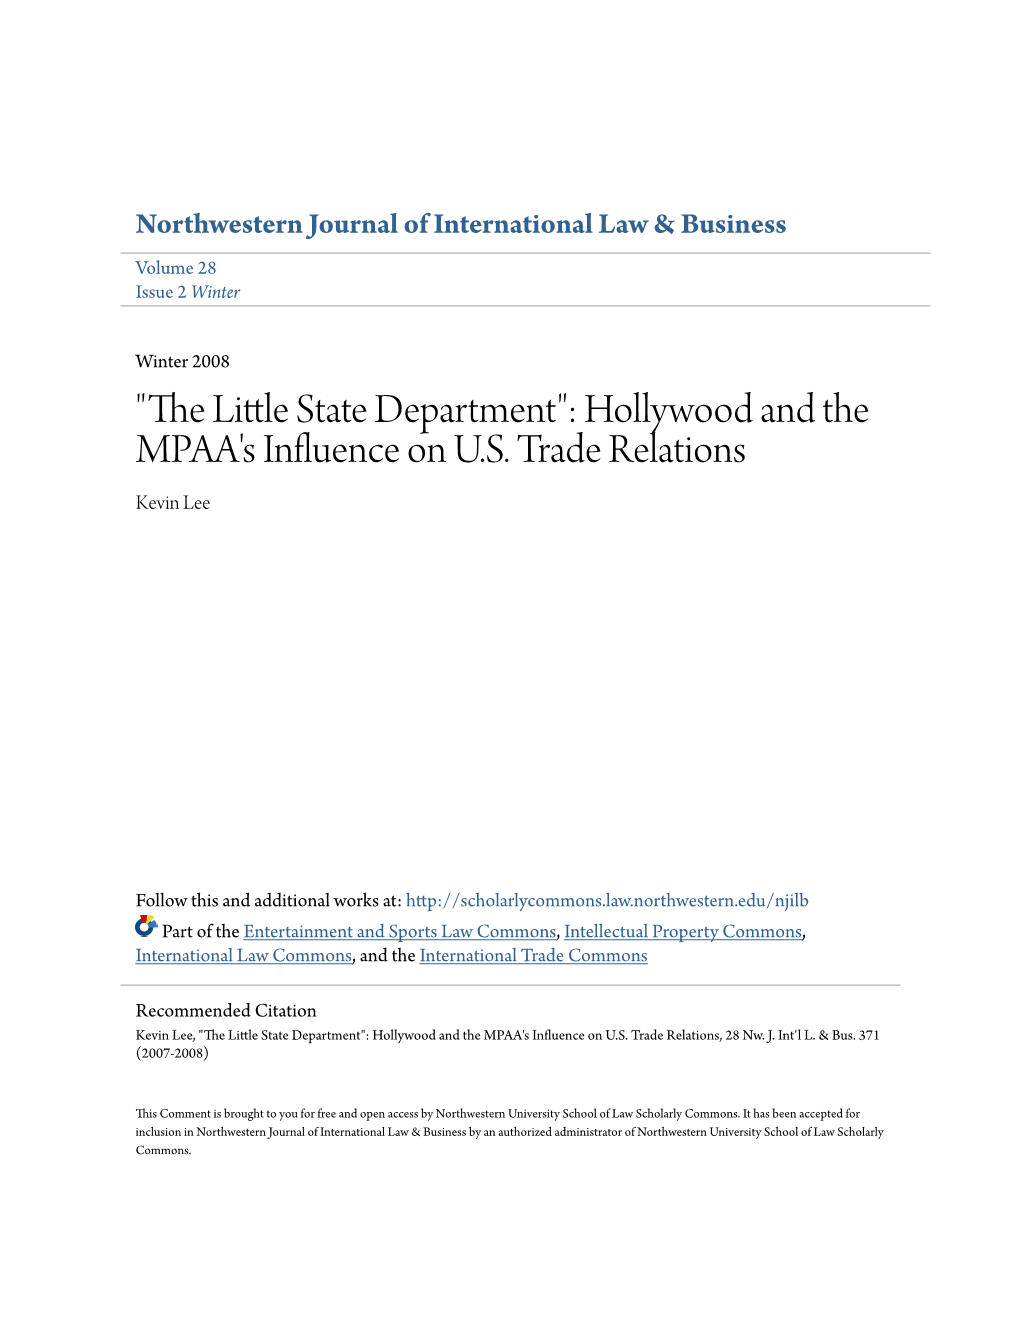 Hollywood and the MPAA's Influence on US Trade Relations